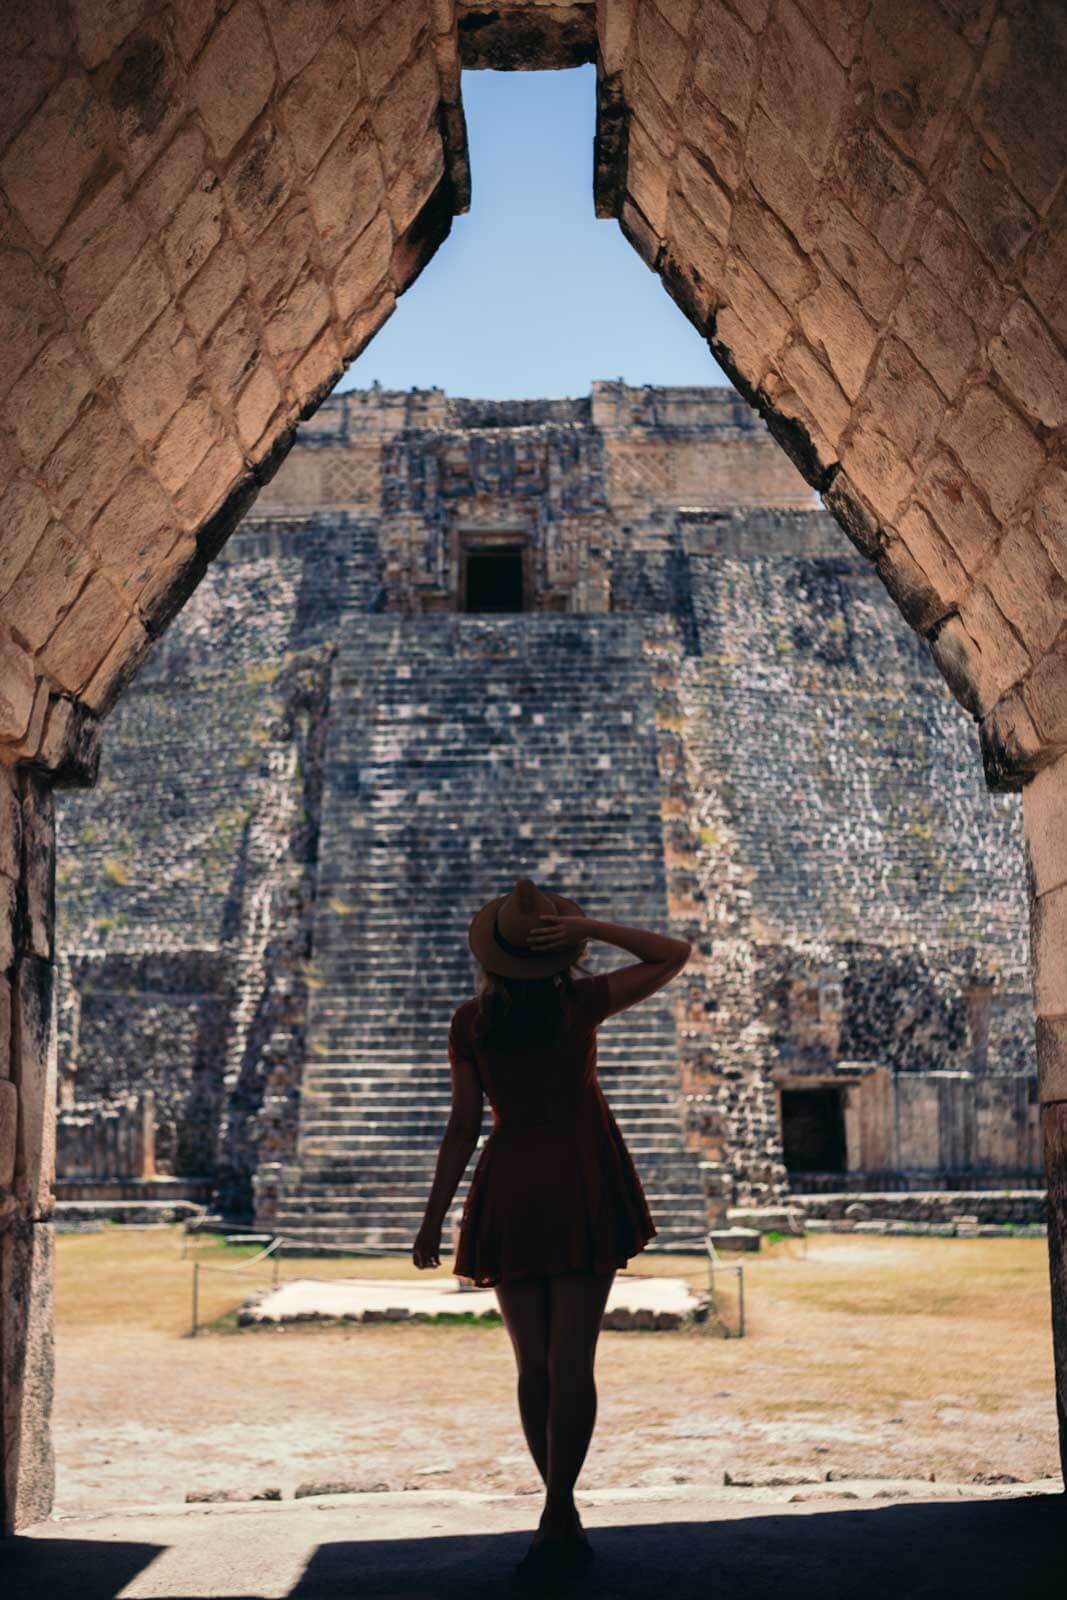 Uxmal With no crowds